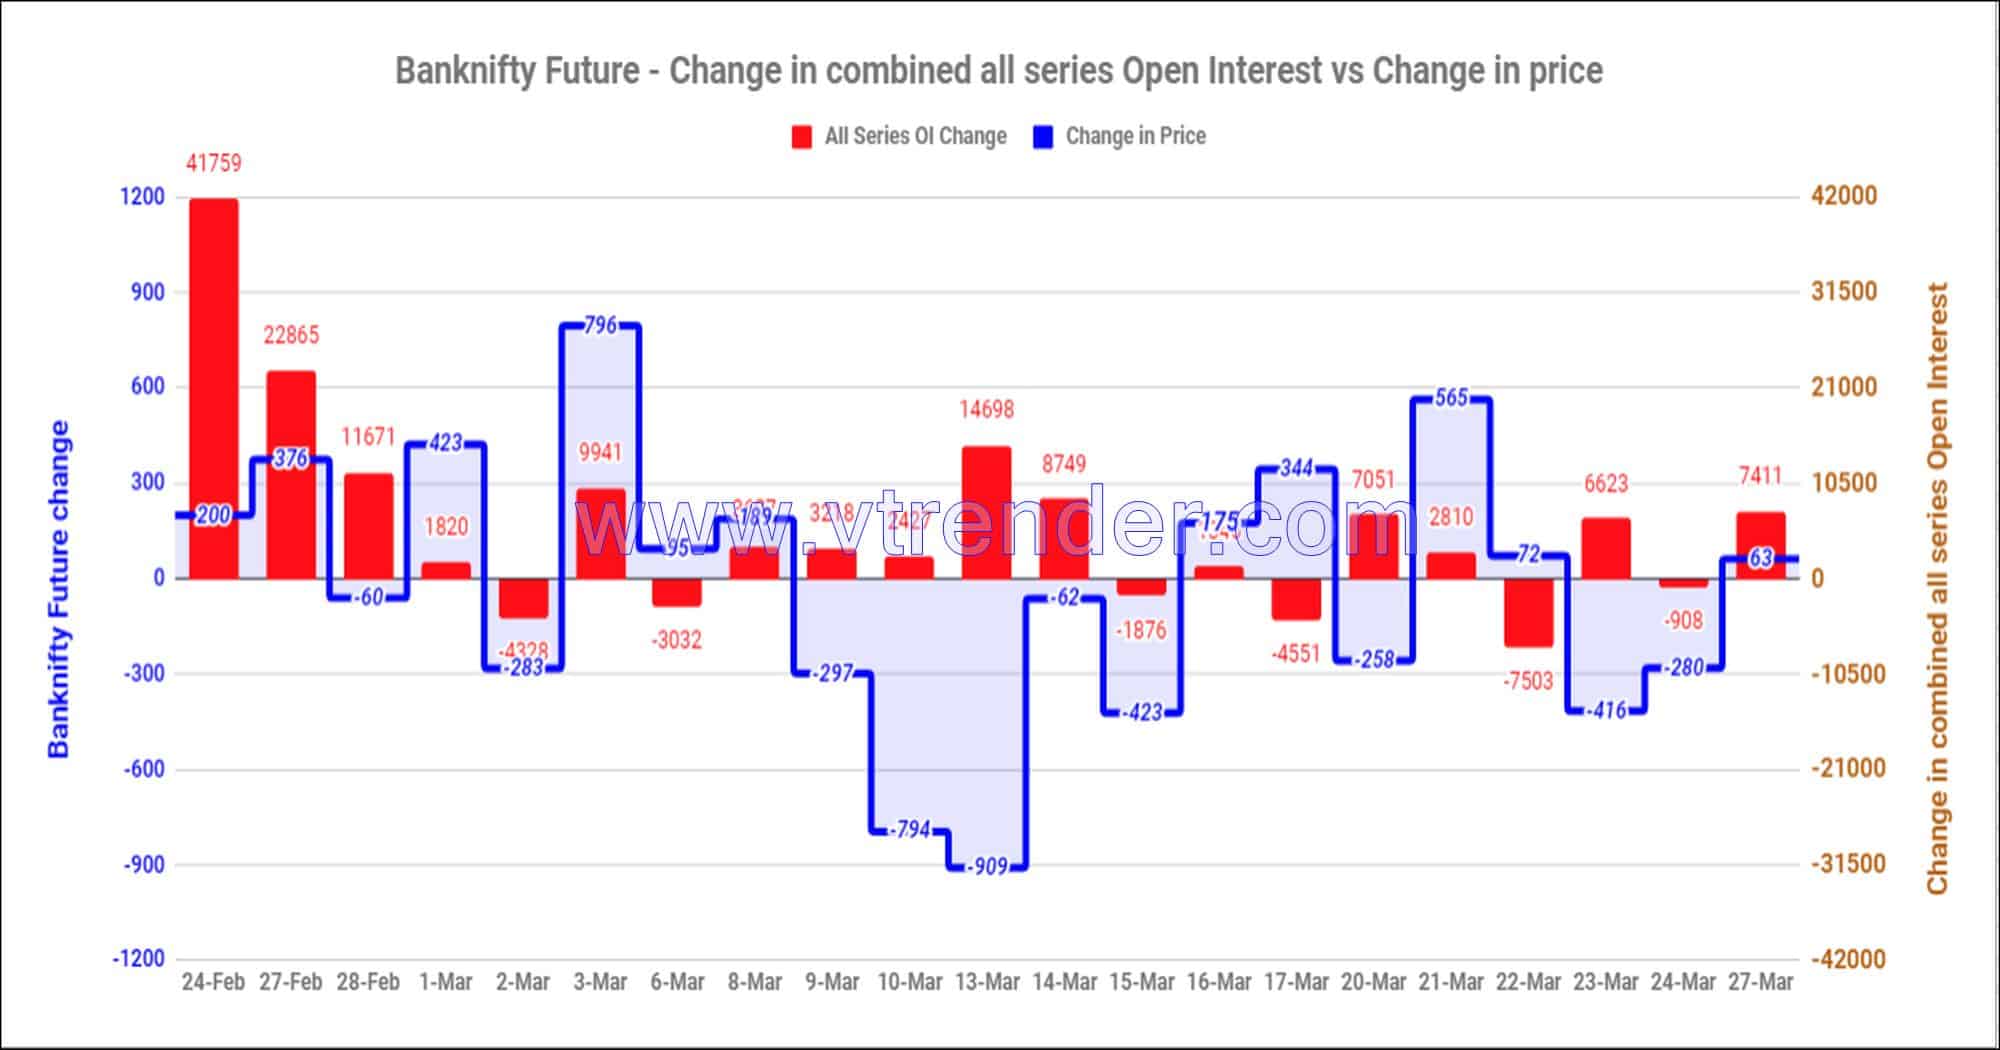 Bnfas27Mar Nifty And Banknifty Futures With All Series Combined Open Interest – 27Th Mar 2023 Banknifty, Nifty, Open Interest